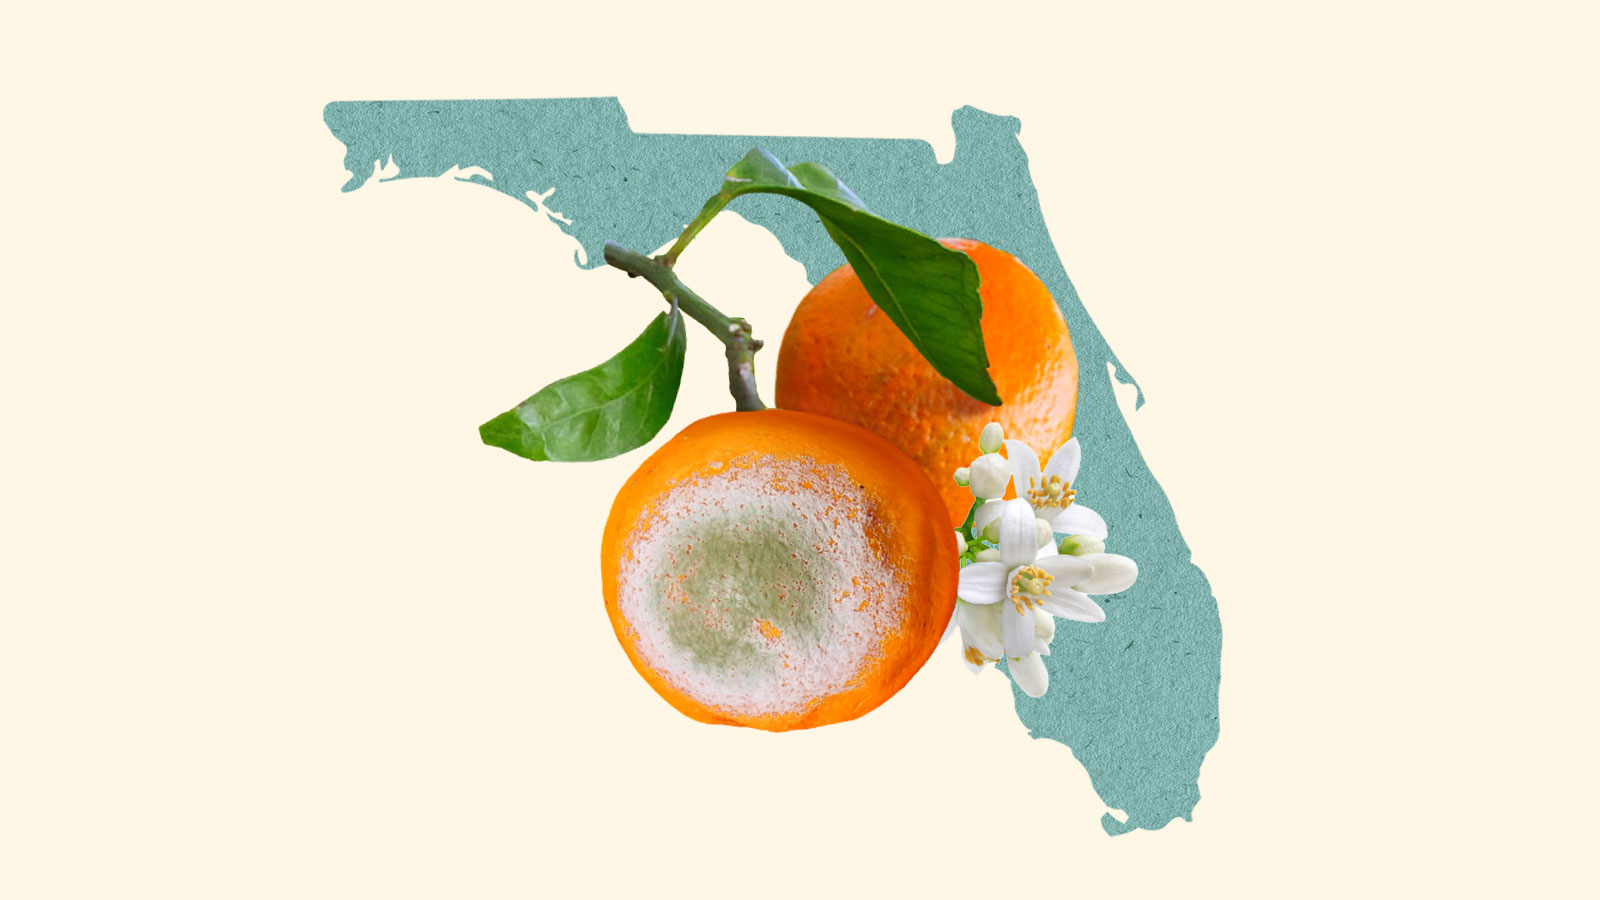 florida silhouette with two oranges on top, one with mold